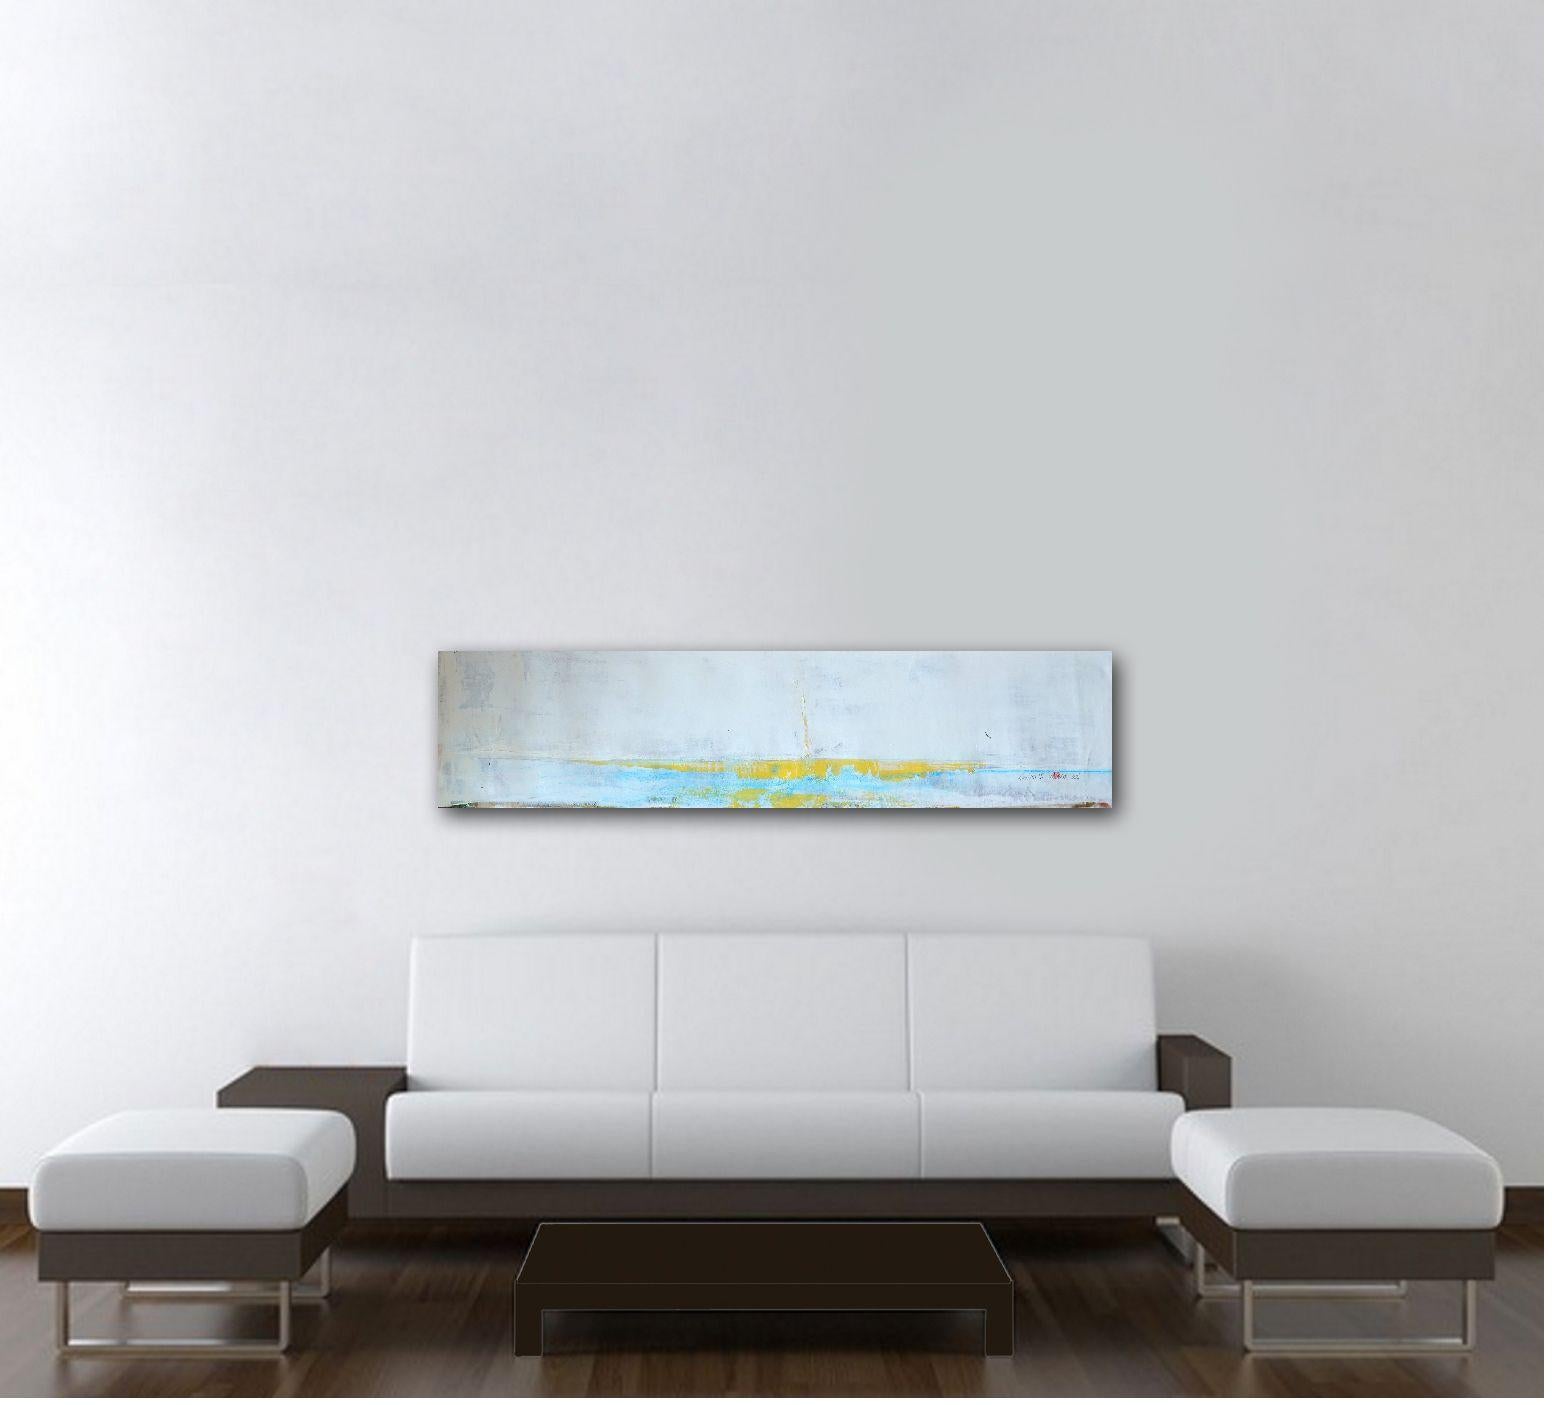 Skyline series creates a sense of space and add a system of arranging your   environment to create harmony.    This high-quality one of a kind acrylic painting on canvas is 63X14